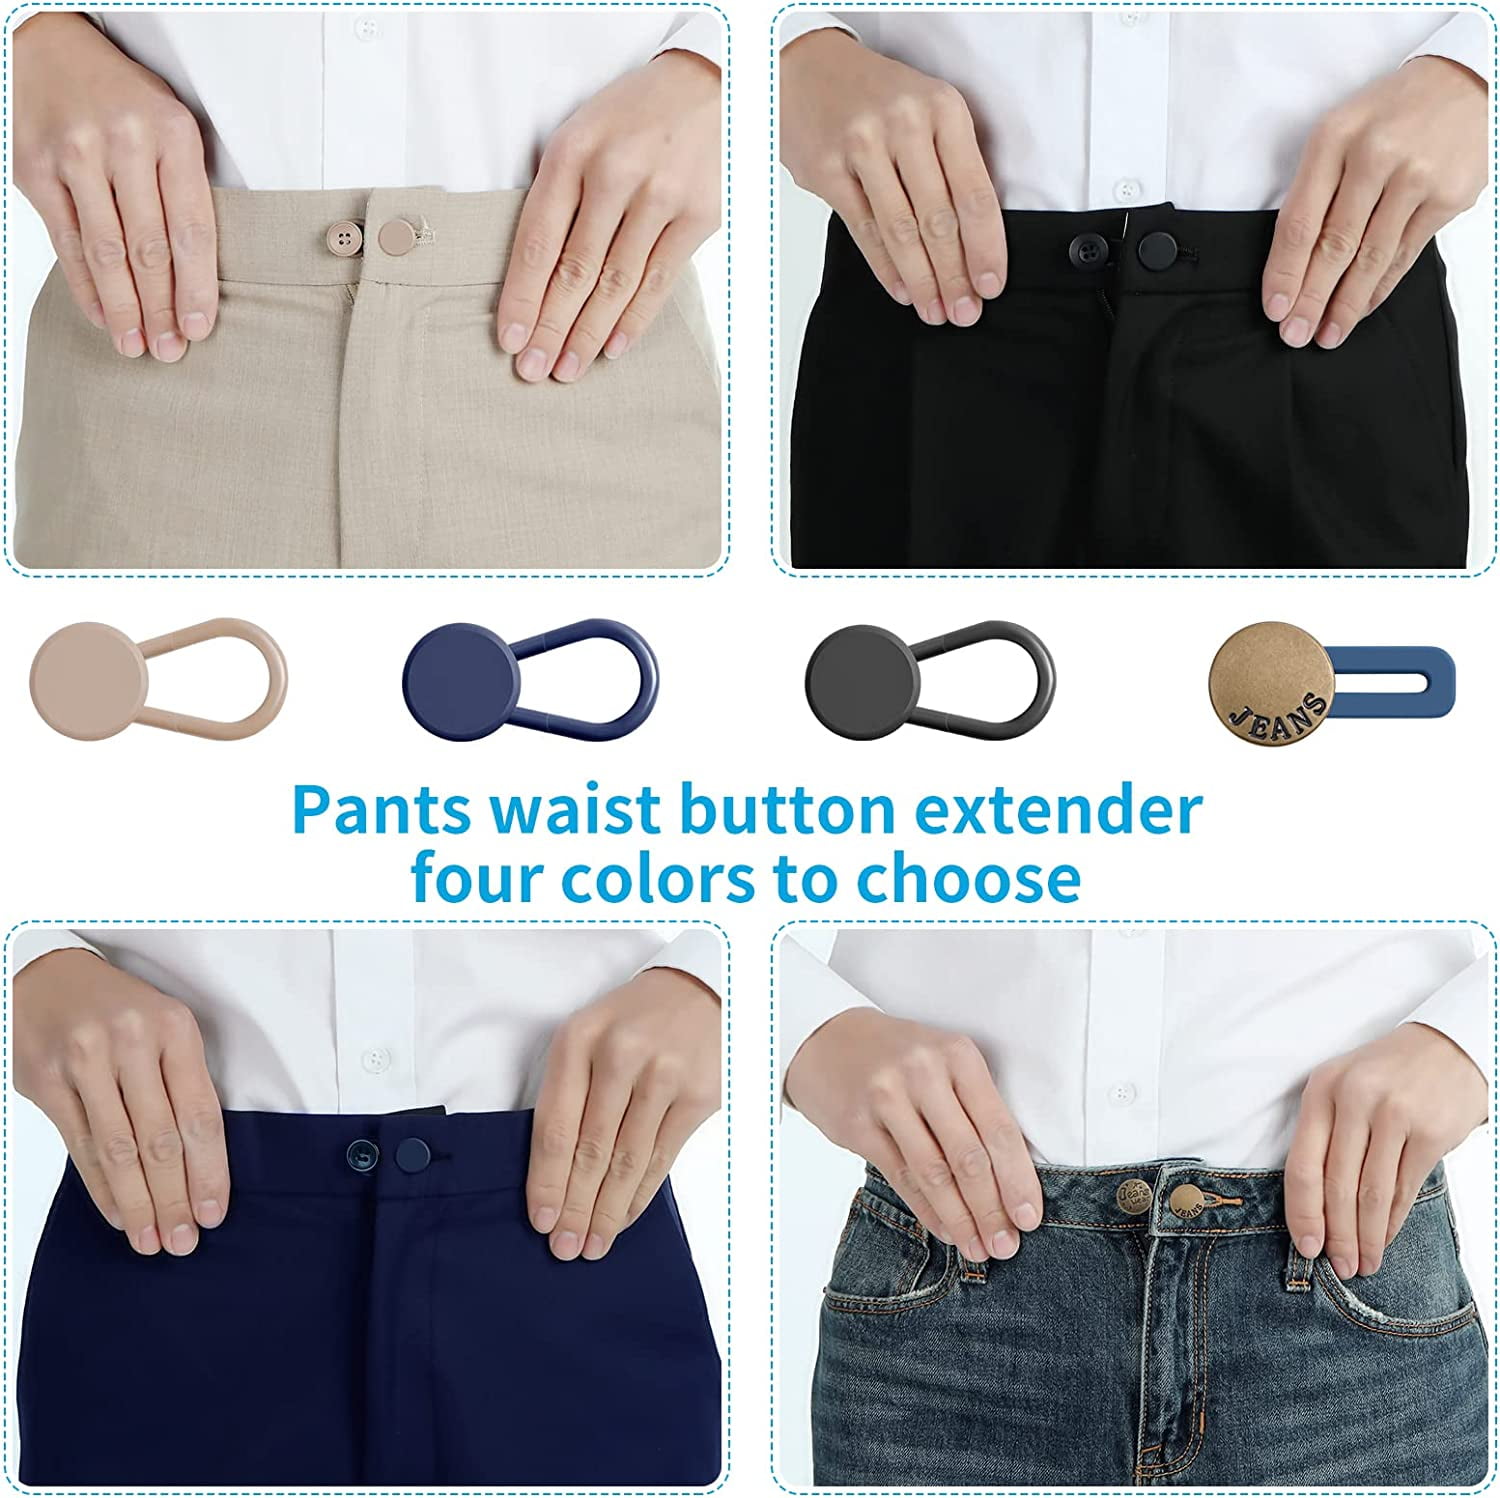 12PCS Button Extenders for Jeans, Pants Button Extender, Waist Extenders  for Pants for Women Men, No Sewing Instant Waistband Extension 1-1.8 Inches  